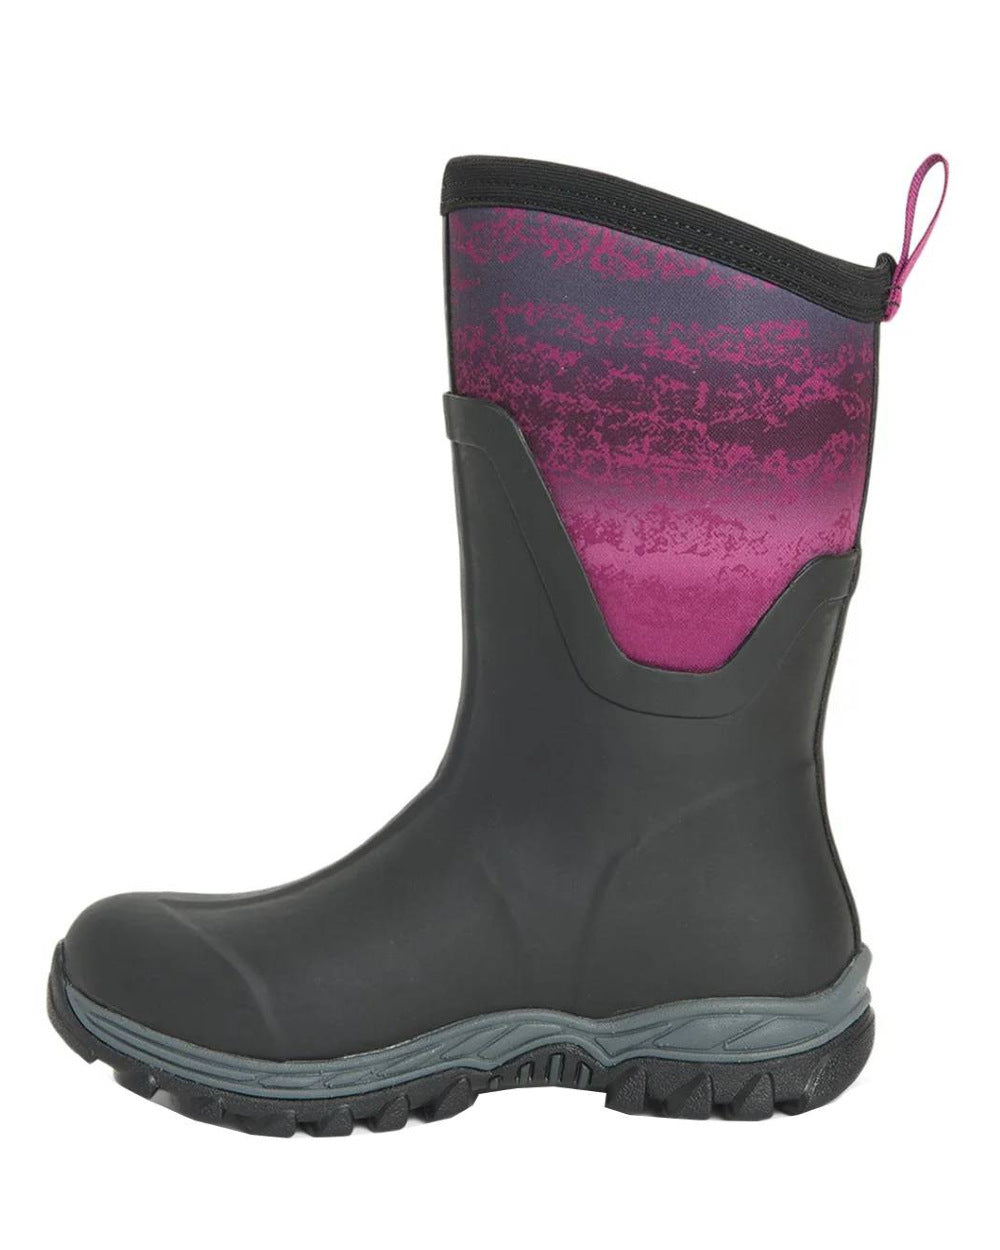 Magenta Digi Fade Print Coloured Muck Boots Womens Arctic Sport II Mid Wellingtons On A White Background 